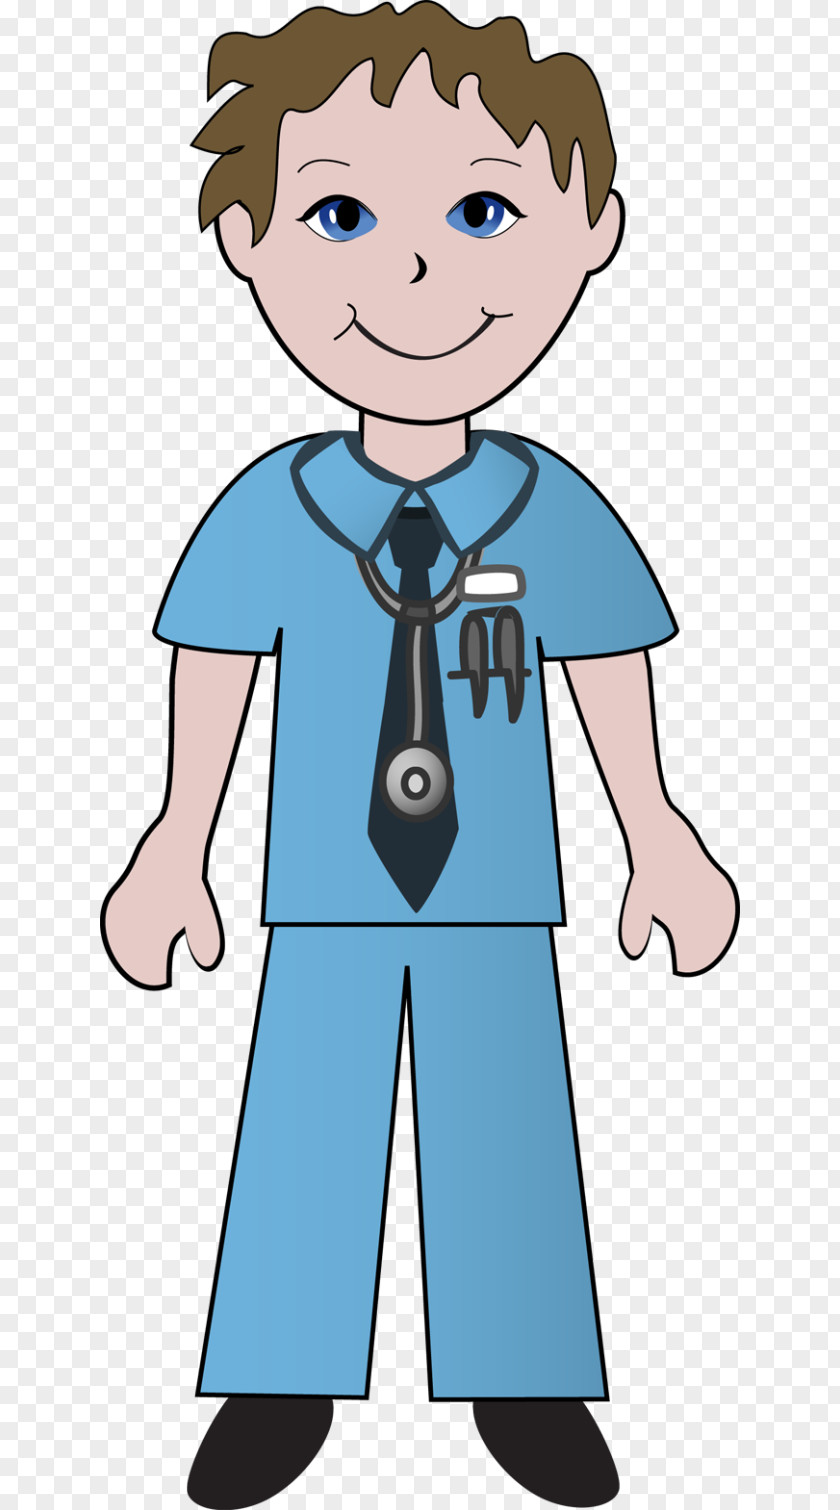 Nursing Meeting Cliparts Doctor Of Practice Physician Clip Art PNG